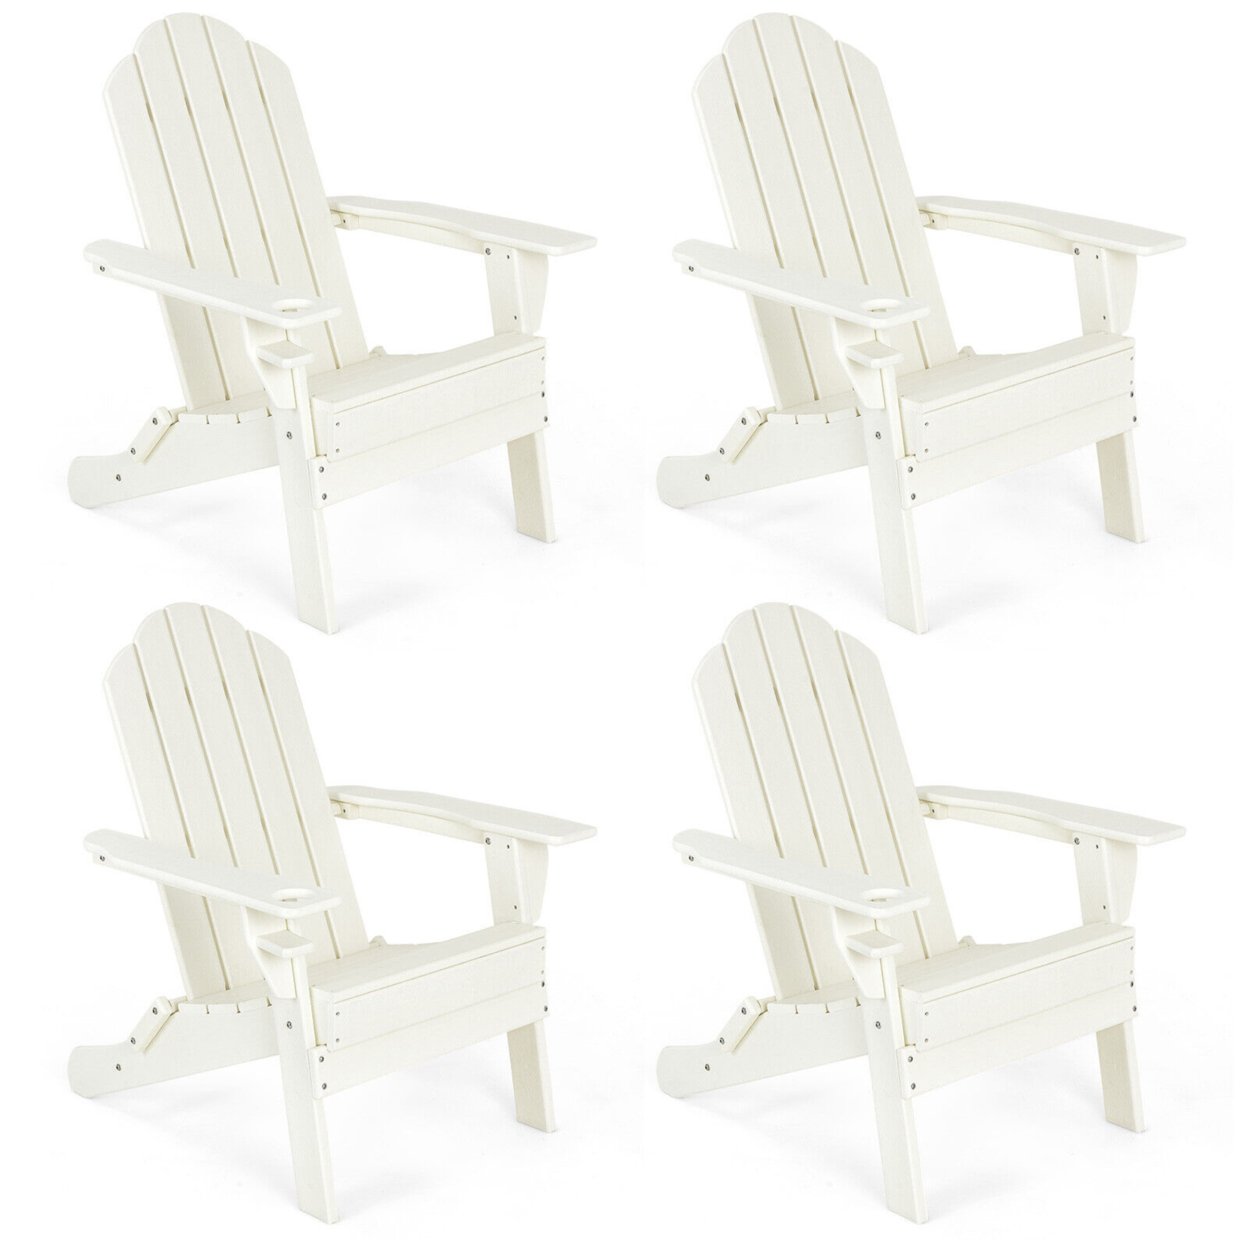 4PCS Patio Folding Adirondack Chair Weather Resistant Cup Holder Yard - White